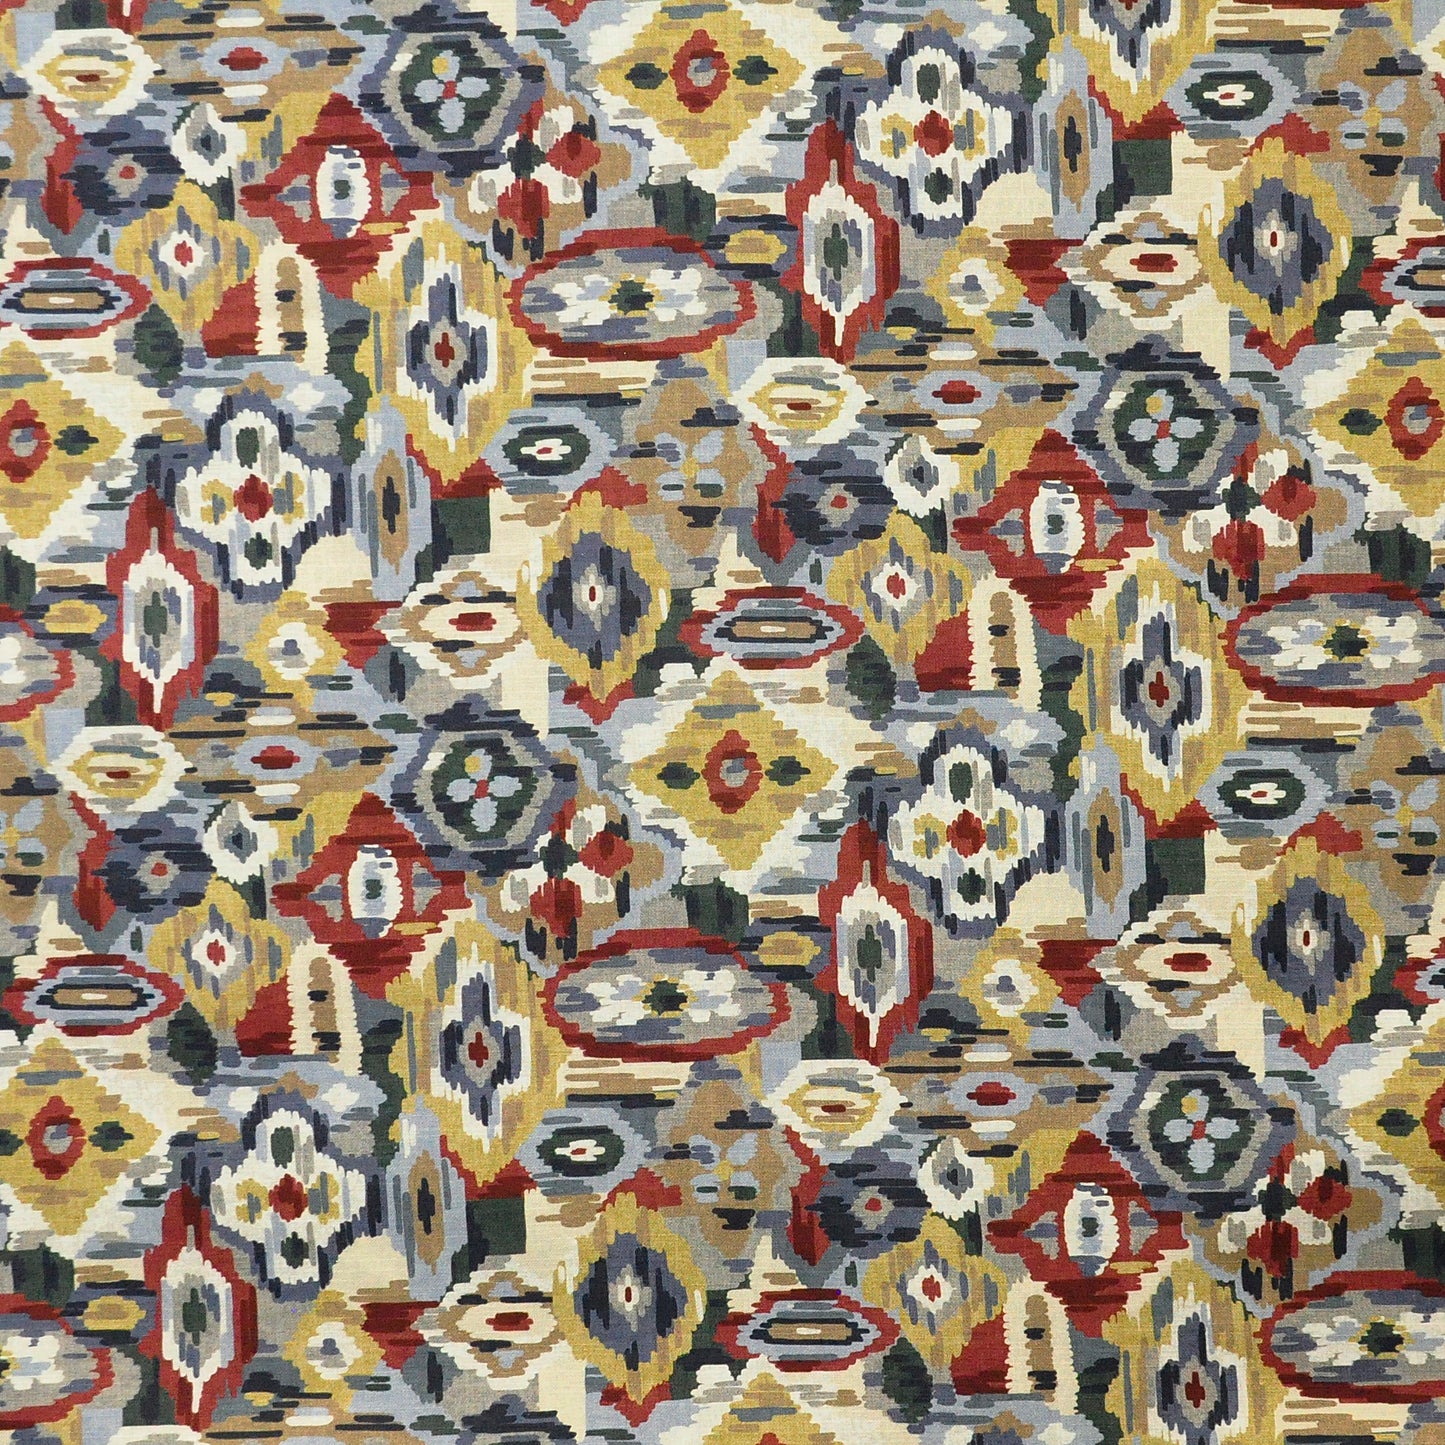 Purchase Maxwell Fabric - Hackney, # 305 Camper